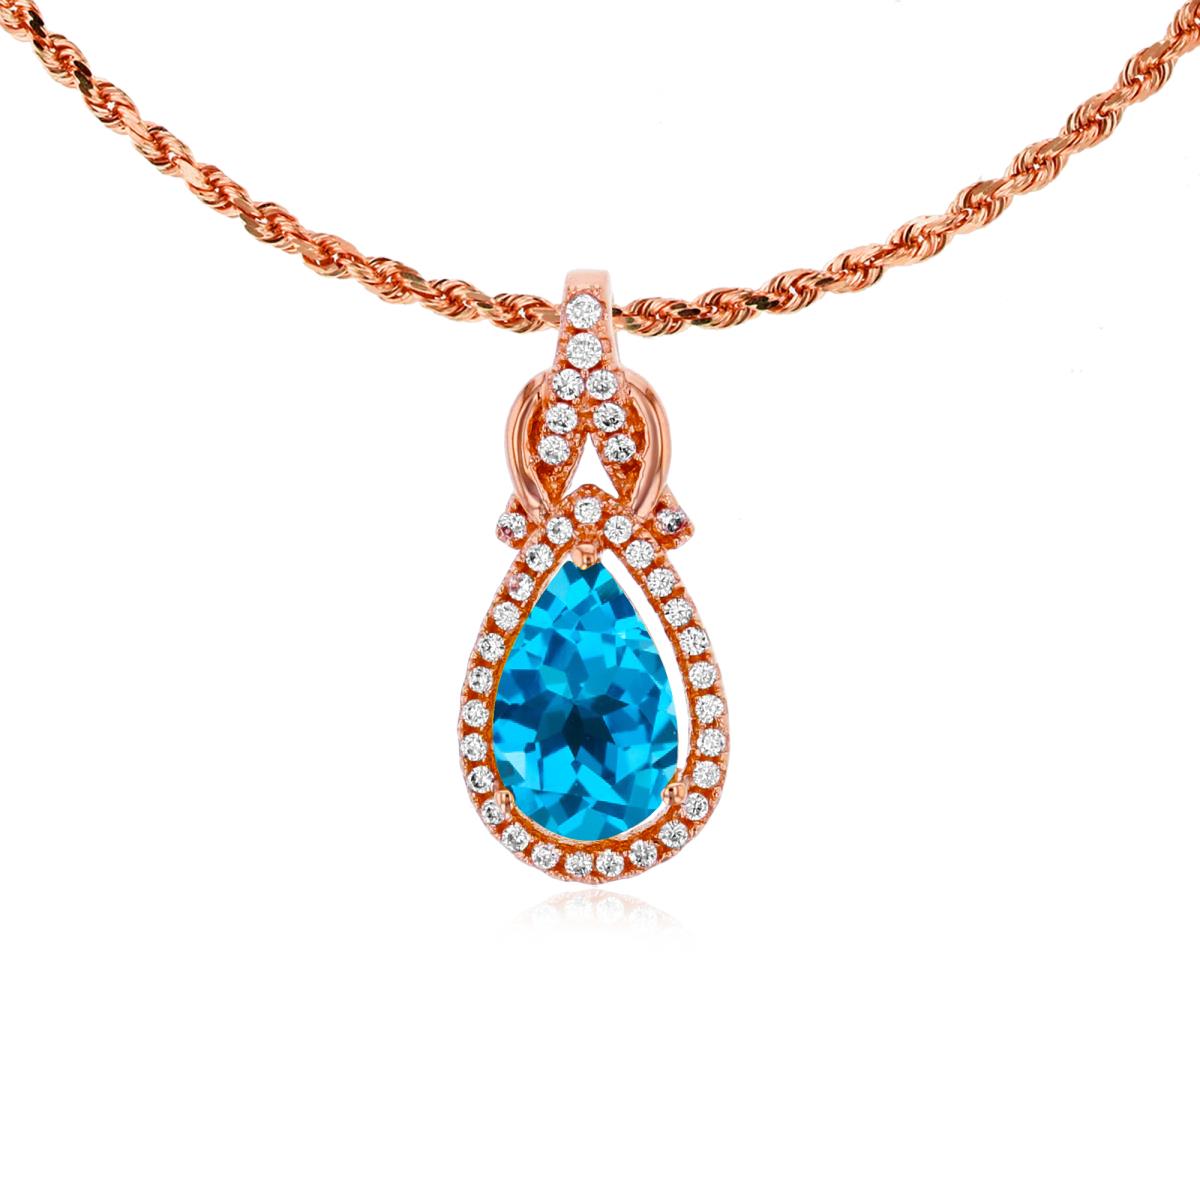 10K Rose Gold 8x5mm Pear Cut Swiss Blue Topaz & 0.11 CTTW Rnd Diamond Knot 18" Rope Chain Necklace